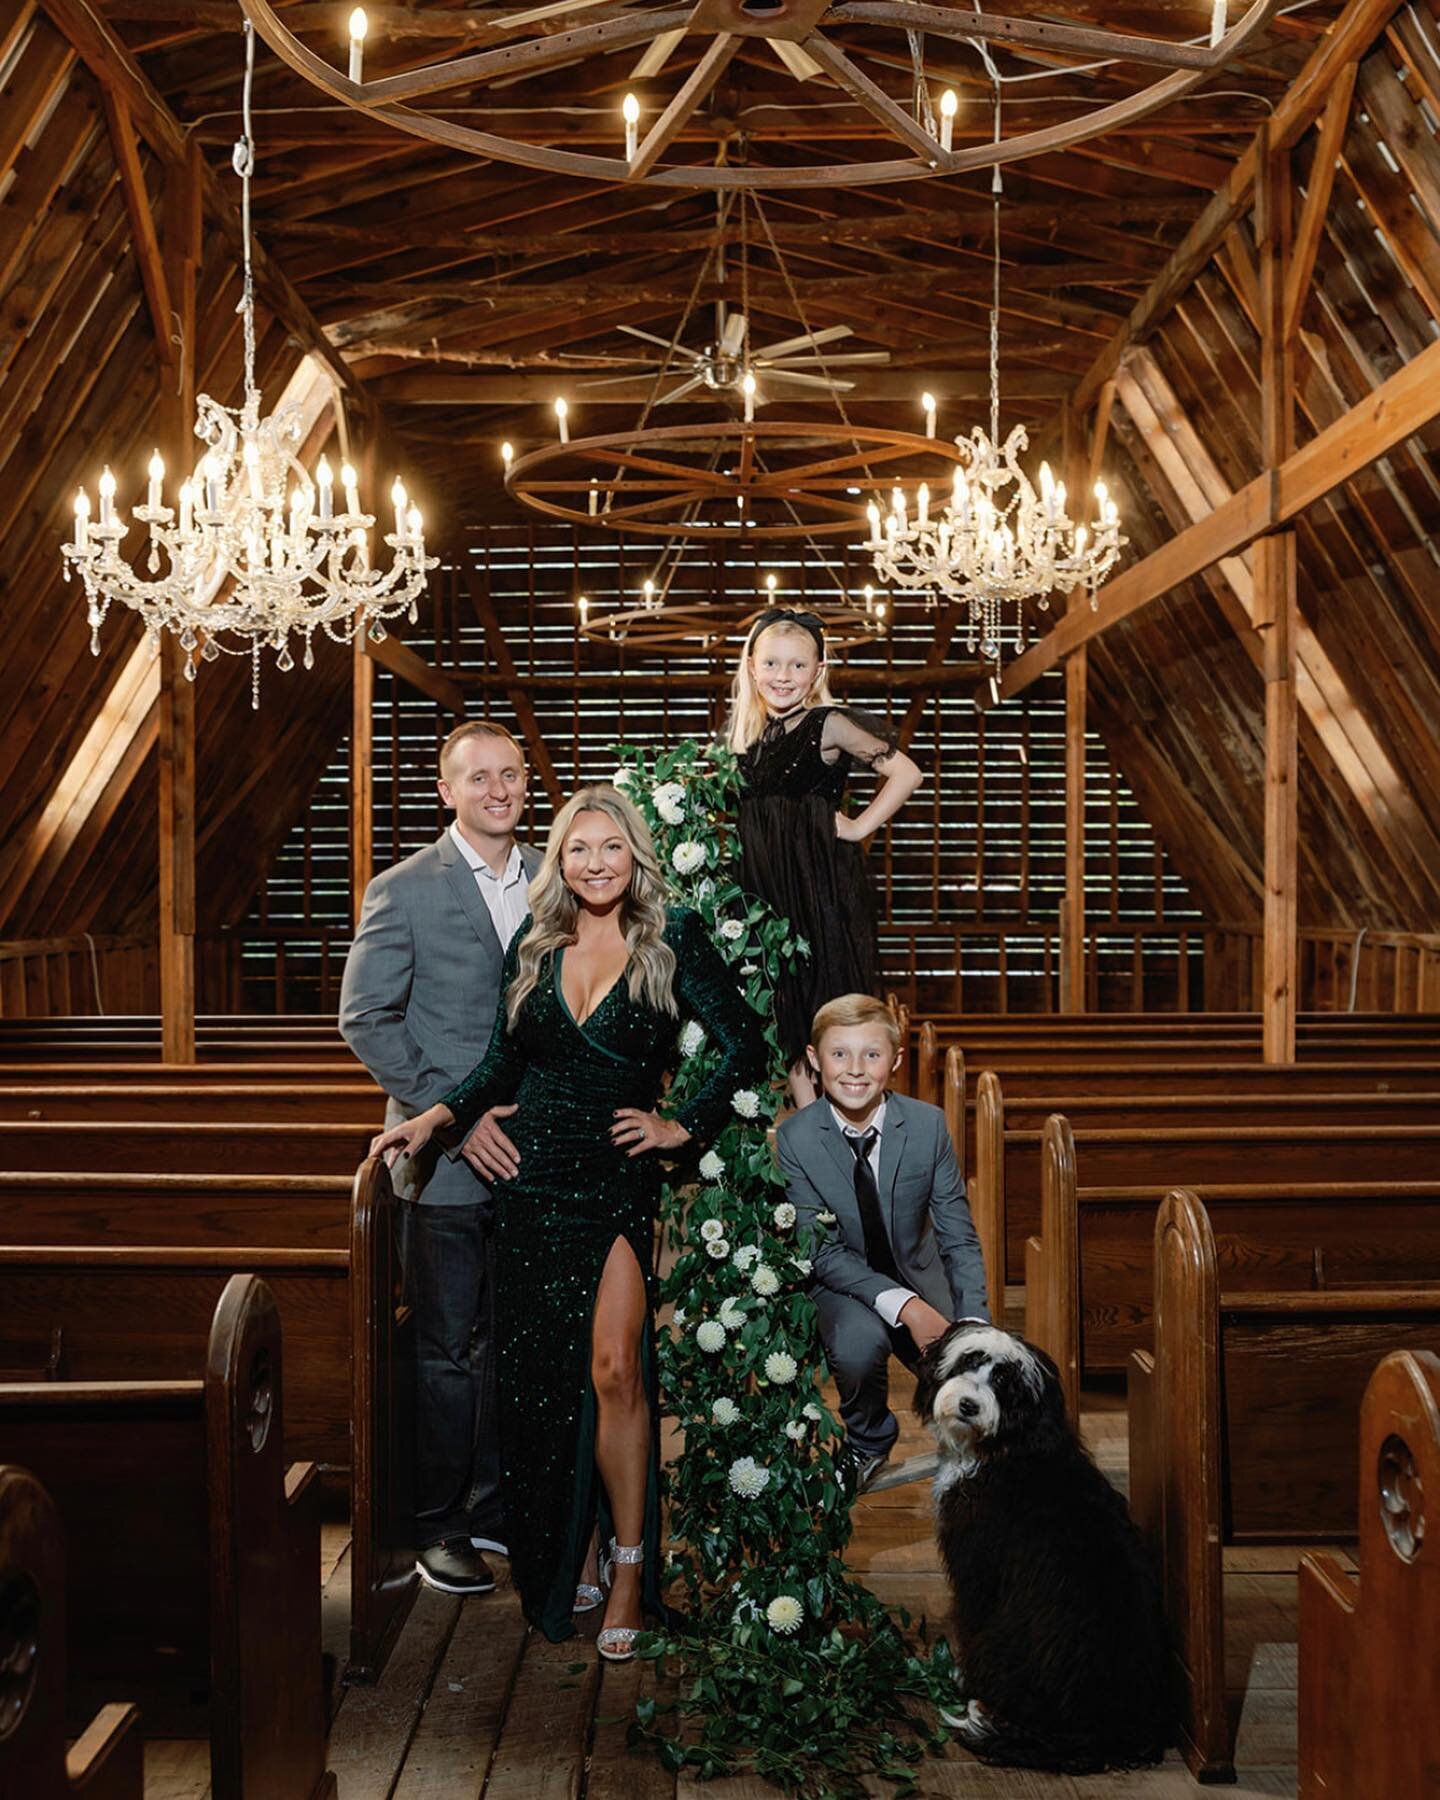 Merry Christmas from our family to yours! May your days be merry and bright 🎄